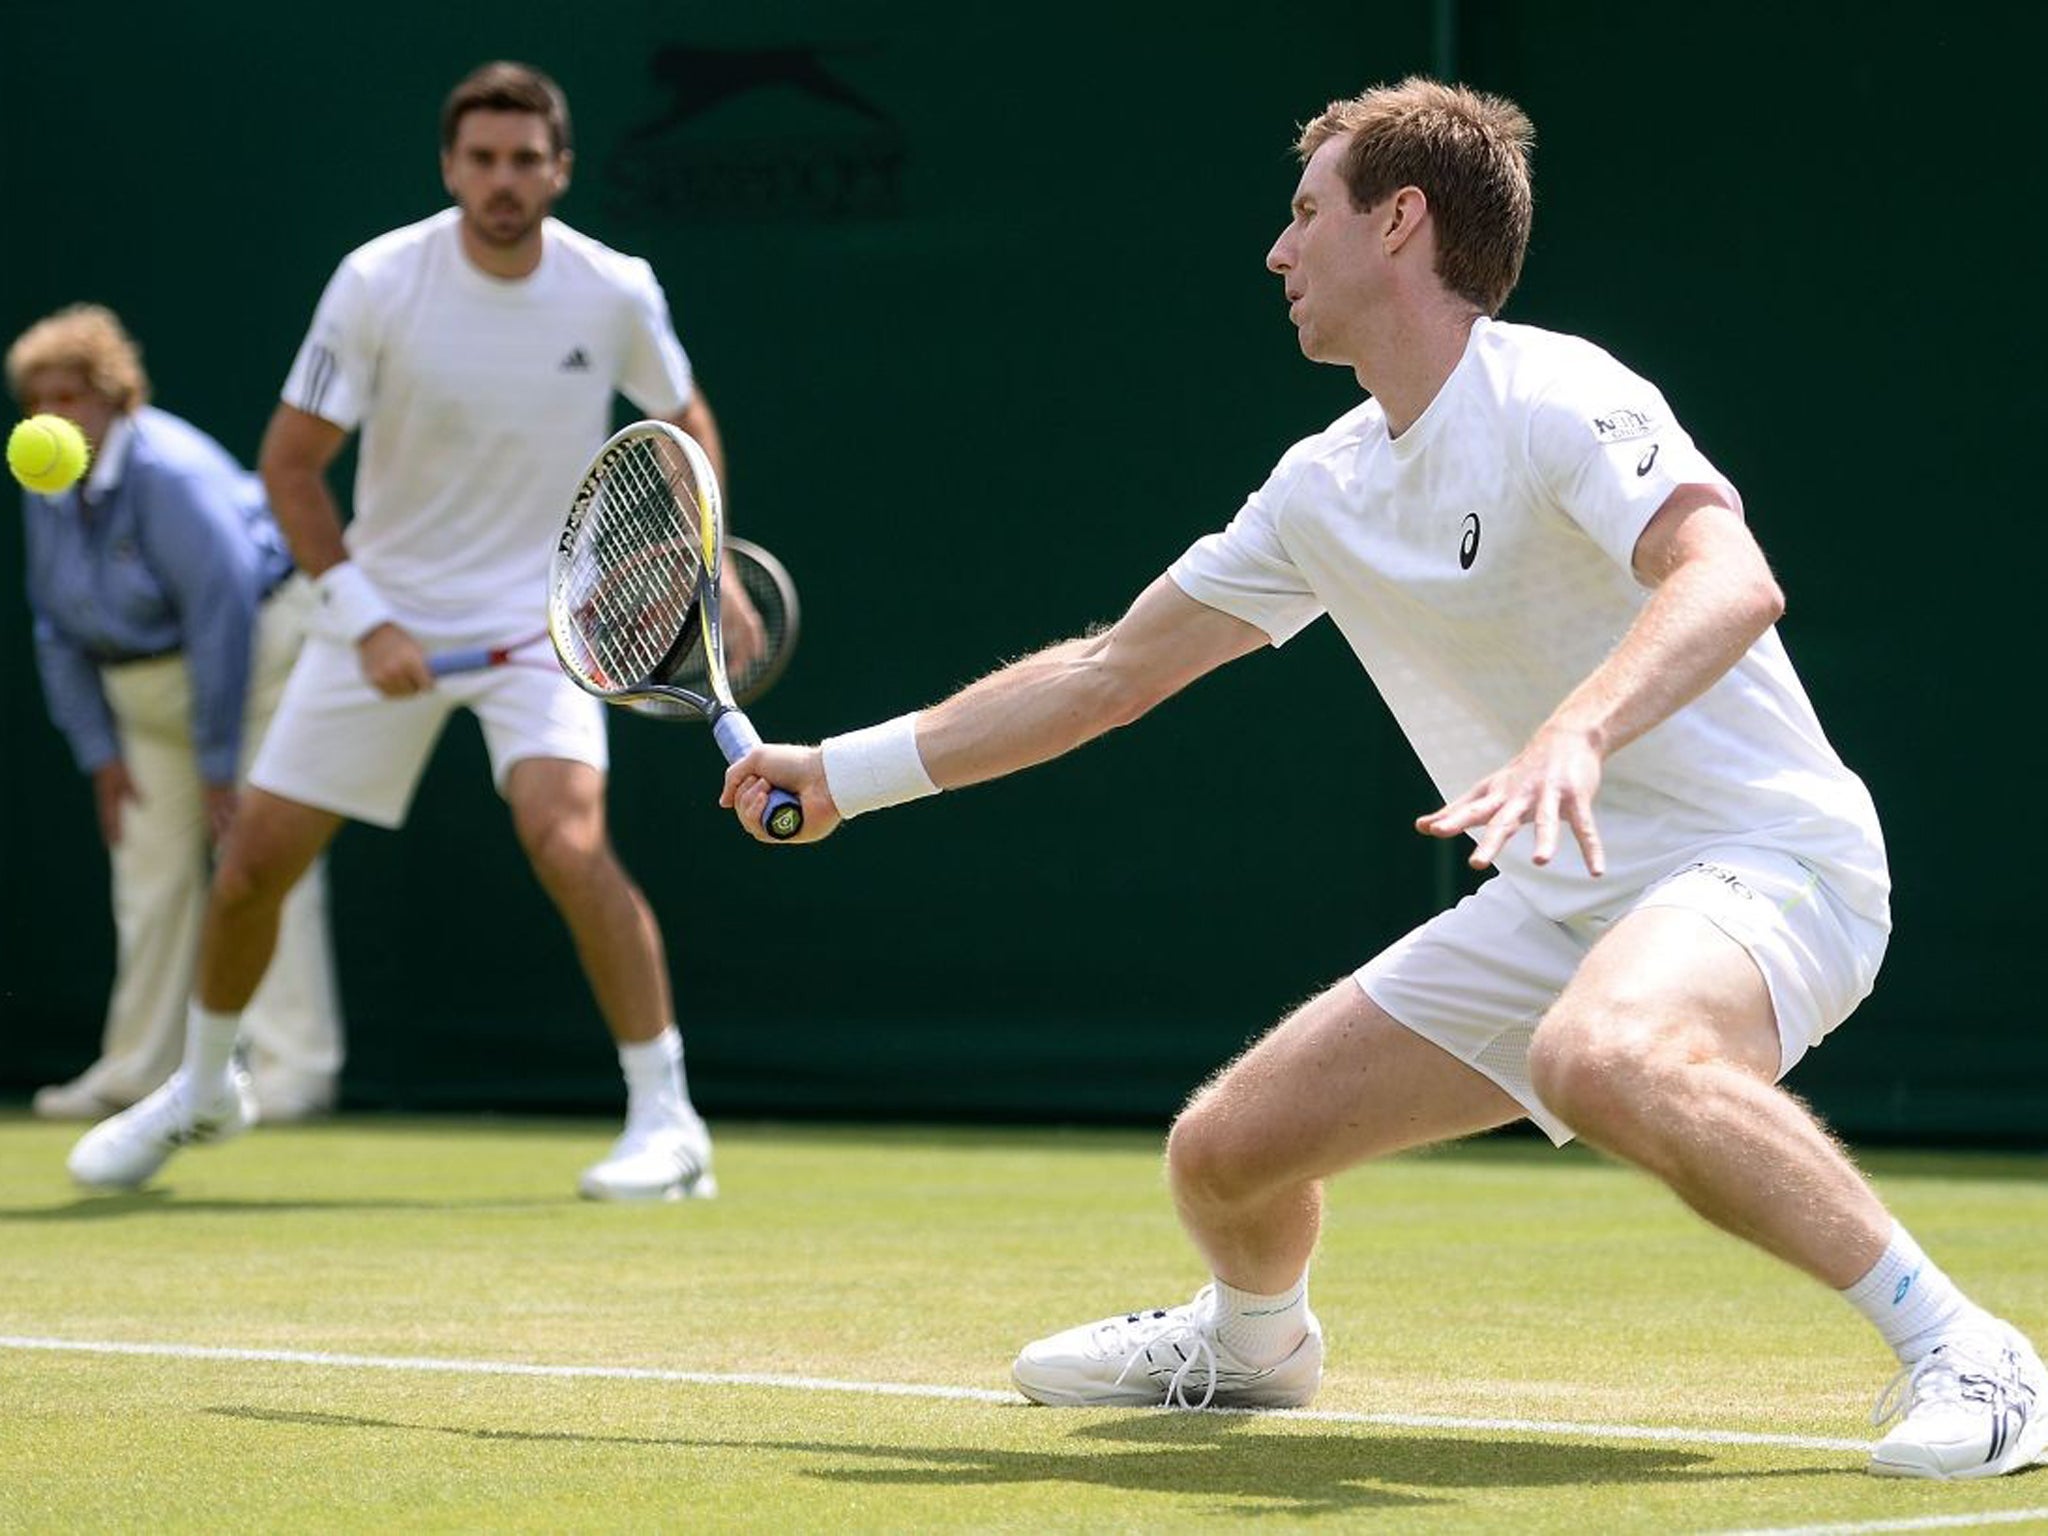 Jonathan Marray plays a forehand next to team-mate Colin Fleming